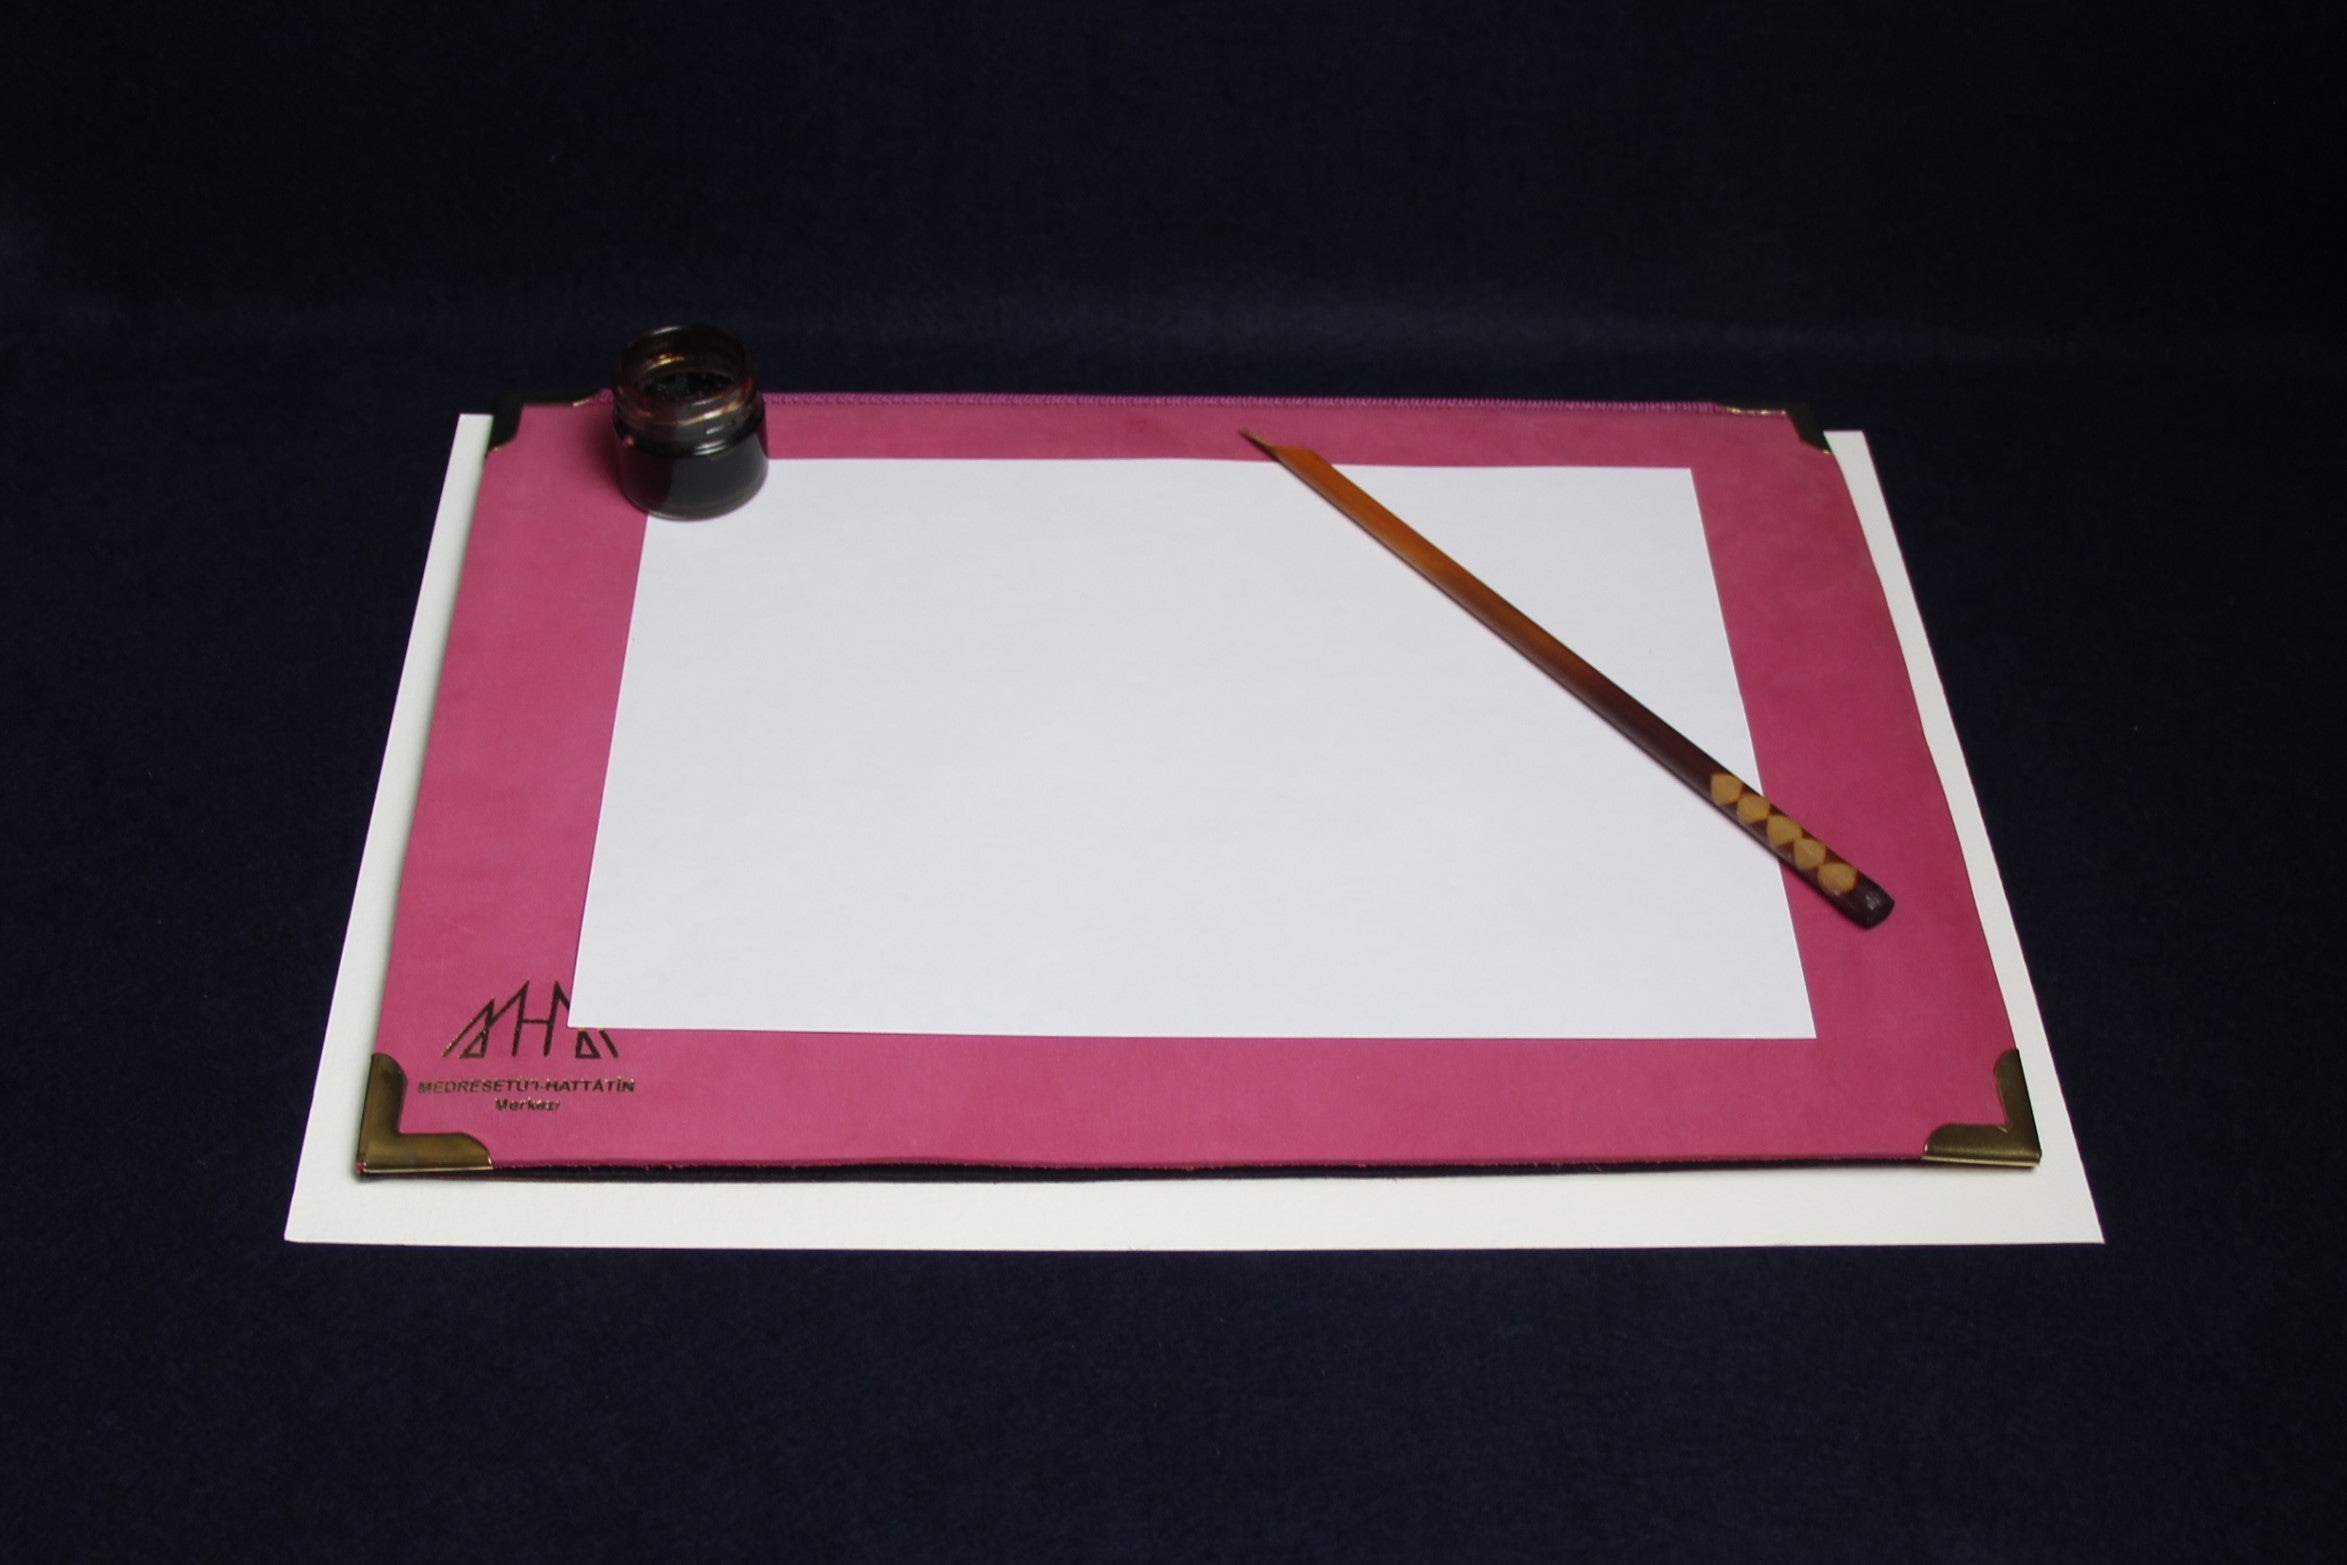 Leather writing mat with back support for Arabic calligraphy - pink